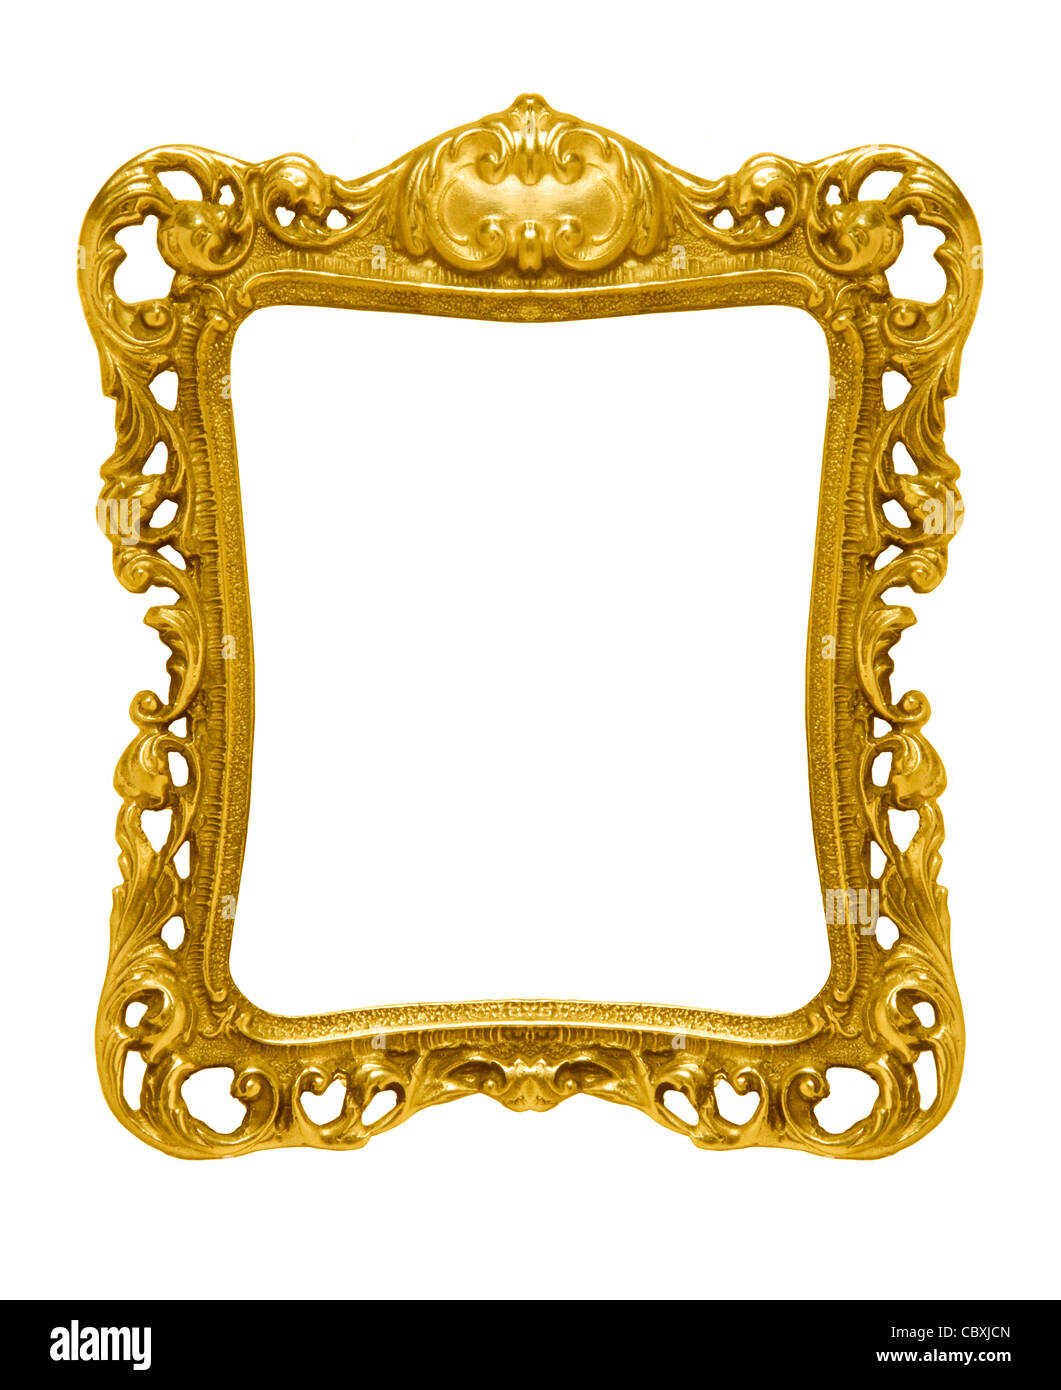 An ornate gold picture frame silhouetted against a white background Stock Photo